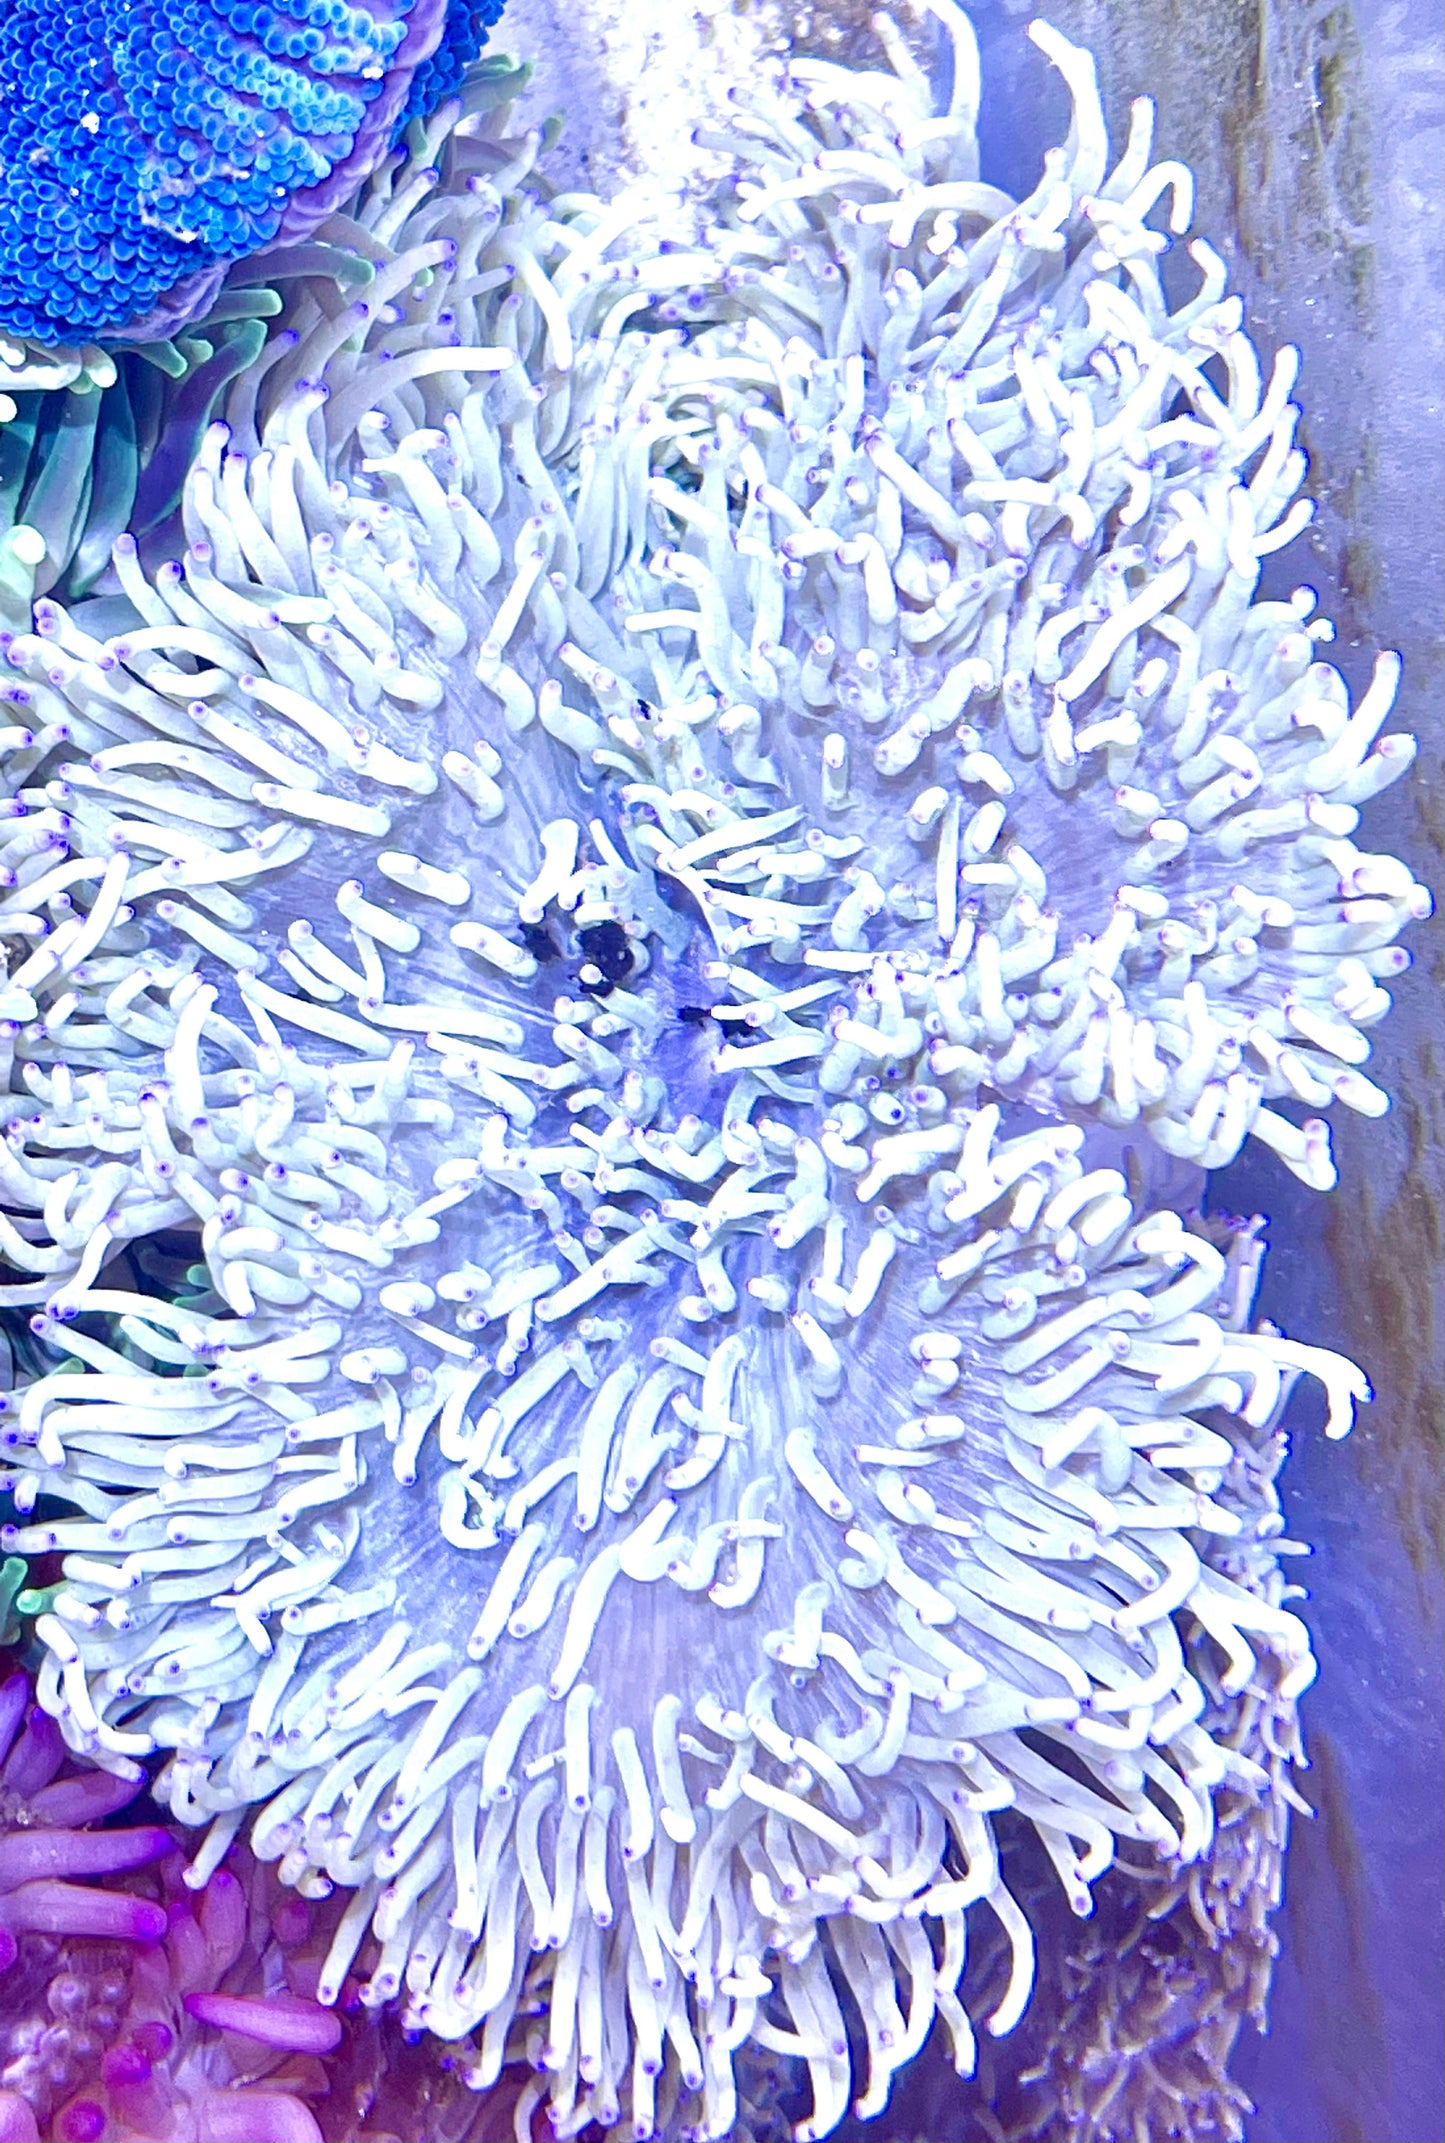 Long Tentacle Anemone Size M: 3" to 5 "